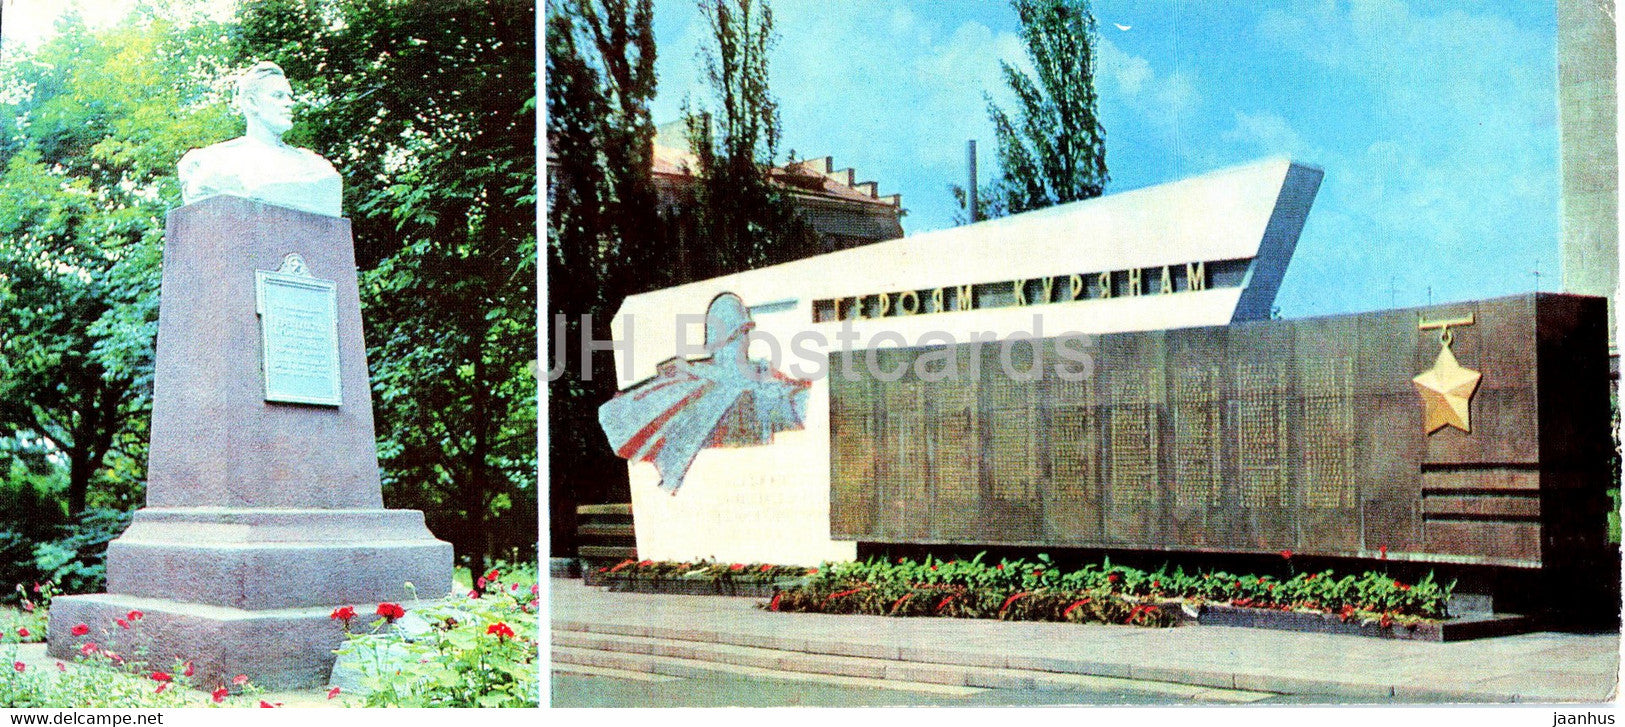 Kursk - WWII monument - monuments to Battle of Kursk - 1975 - Russia USSR - unused - JH Postcards